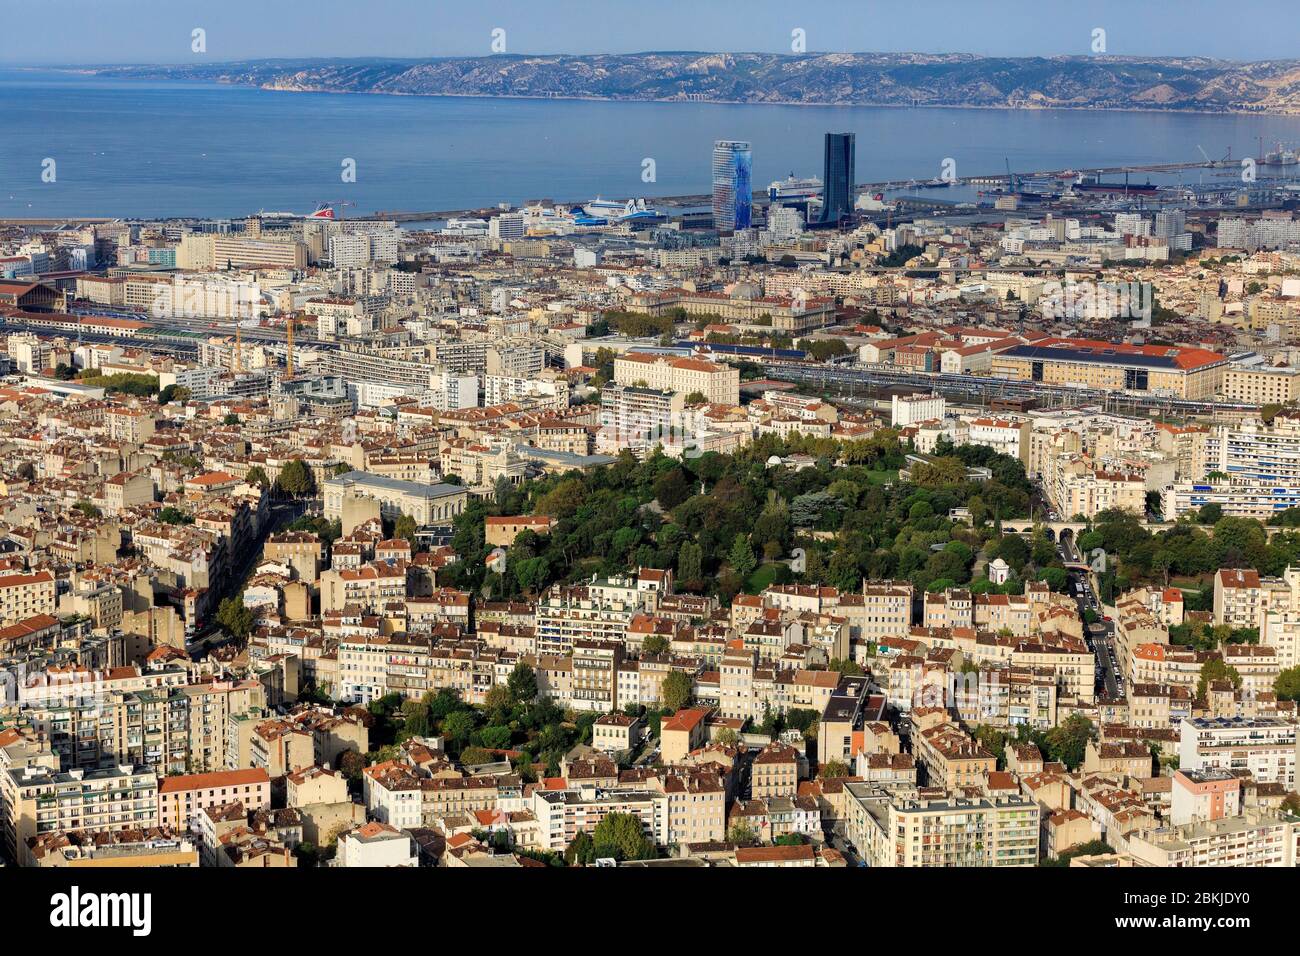 France, Bouches du Rhone, Marseille, 4th arrondissement, Longchamp district, Palais Longchamp garden, Muy barracks (19th century) and the Arenc district, the CMA CGM tower, architect Zaha Hadid and La Marseillaise tower, architect Jean Nouvel in the background (aerial view) Stock Photo